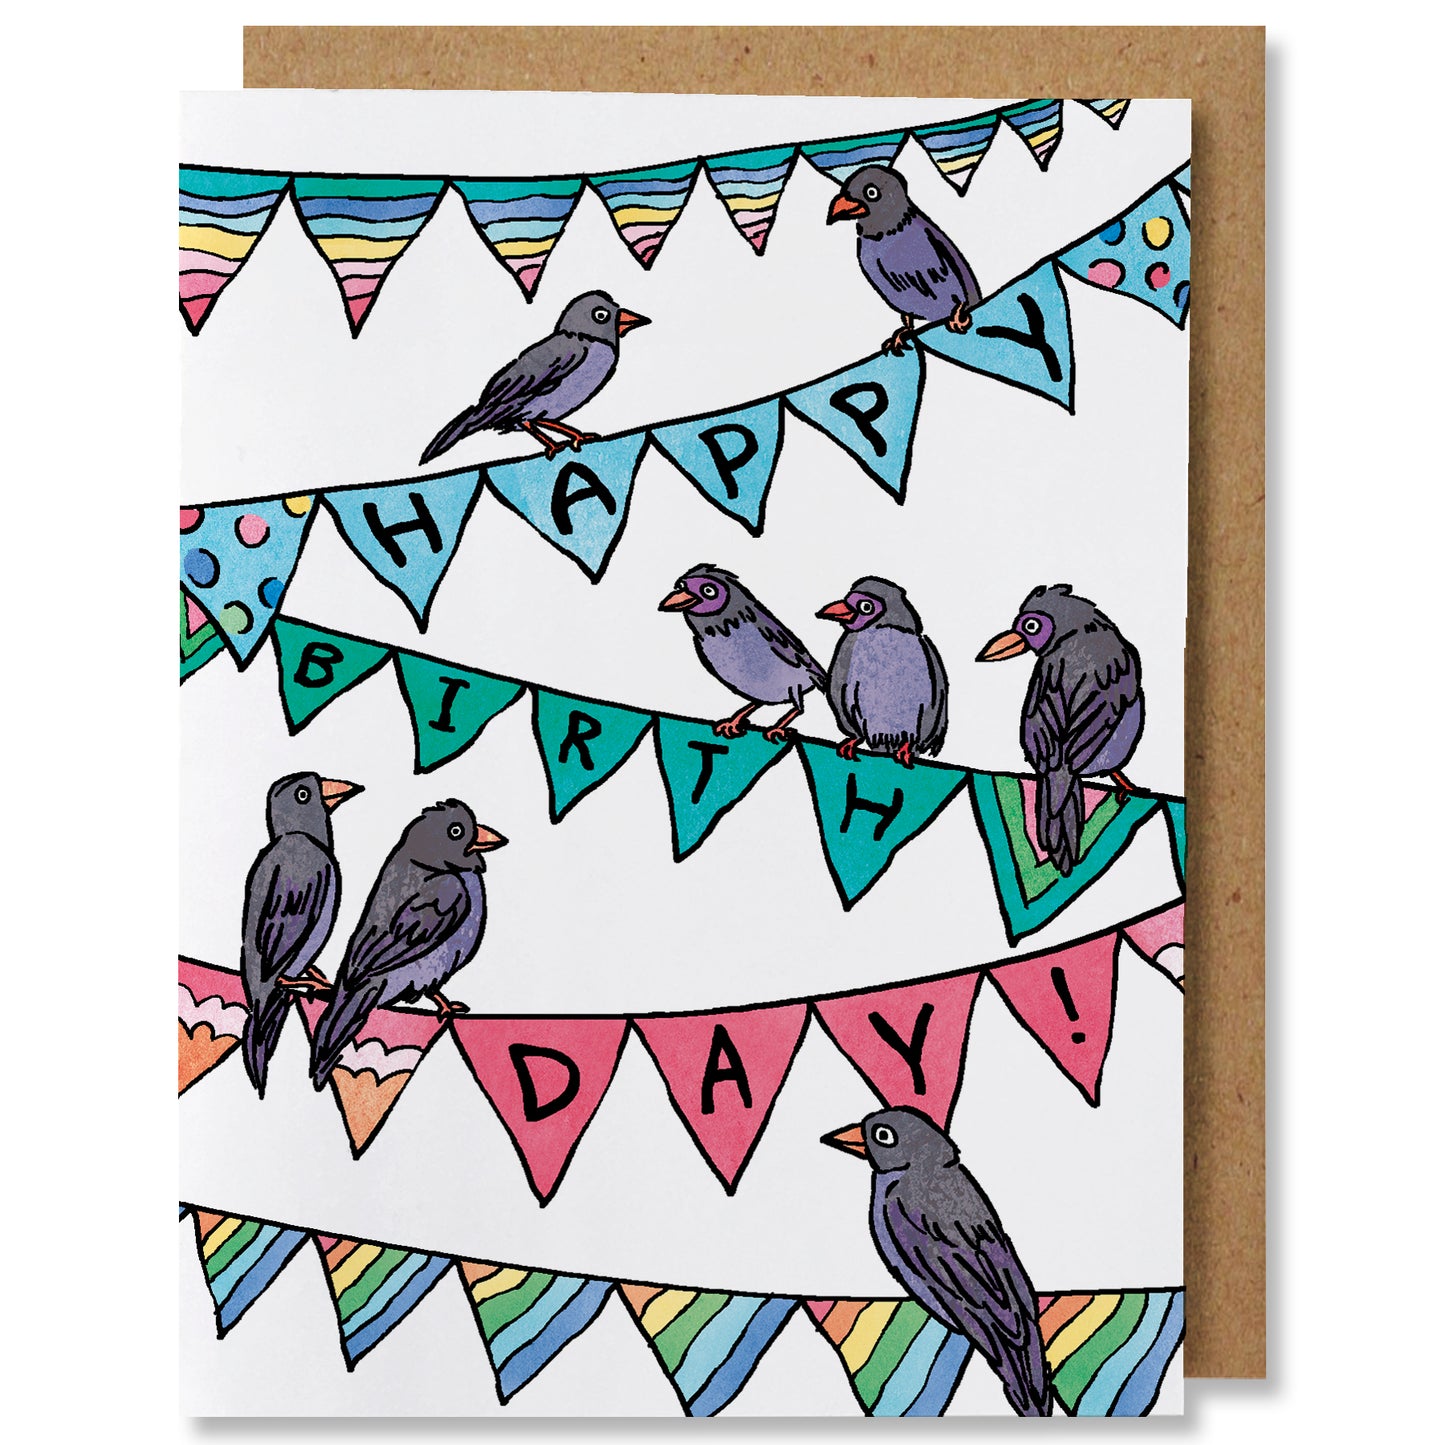 An illustrated greeting card featuring 'happy birthday' displayed across a string of blue, aqua and red flags with black birds sitting atop